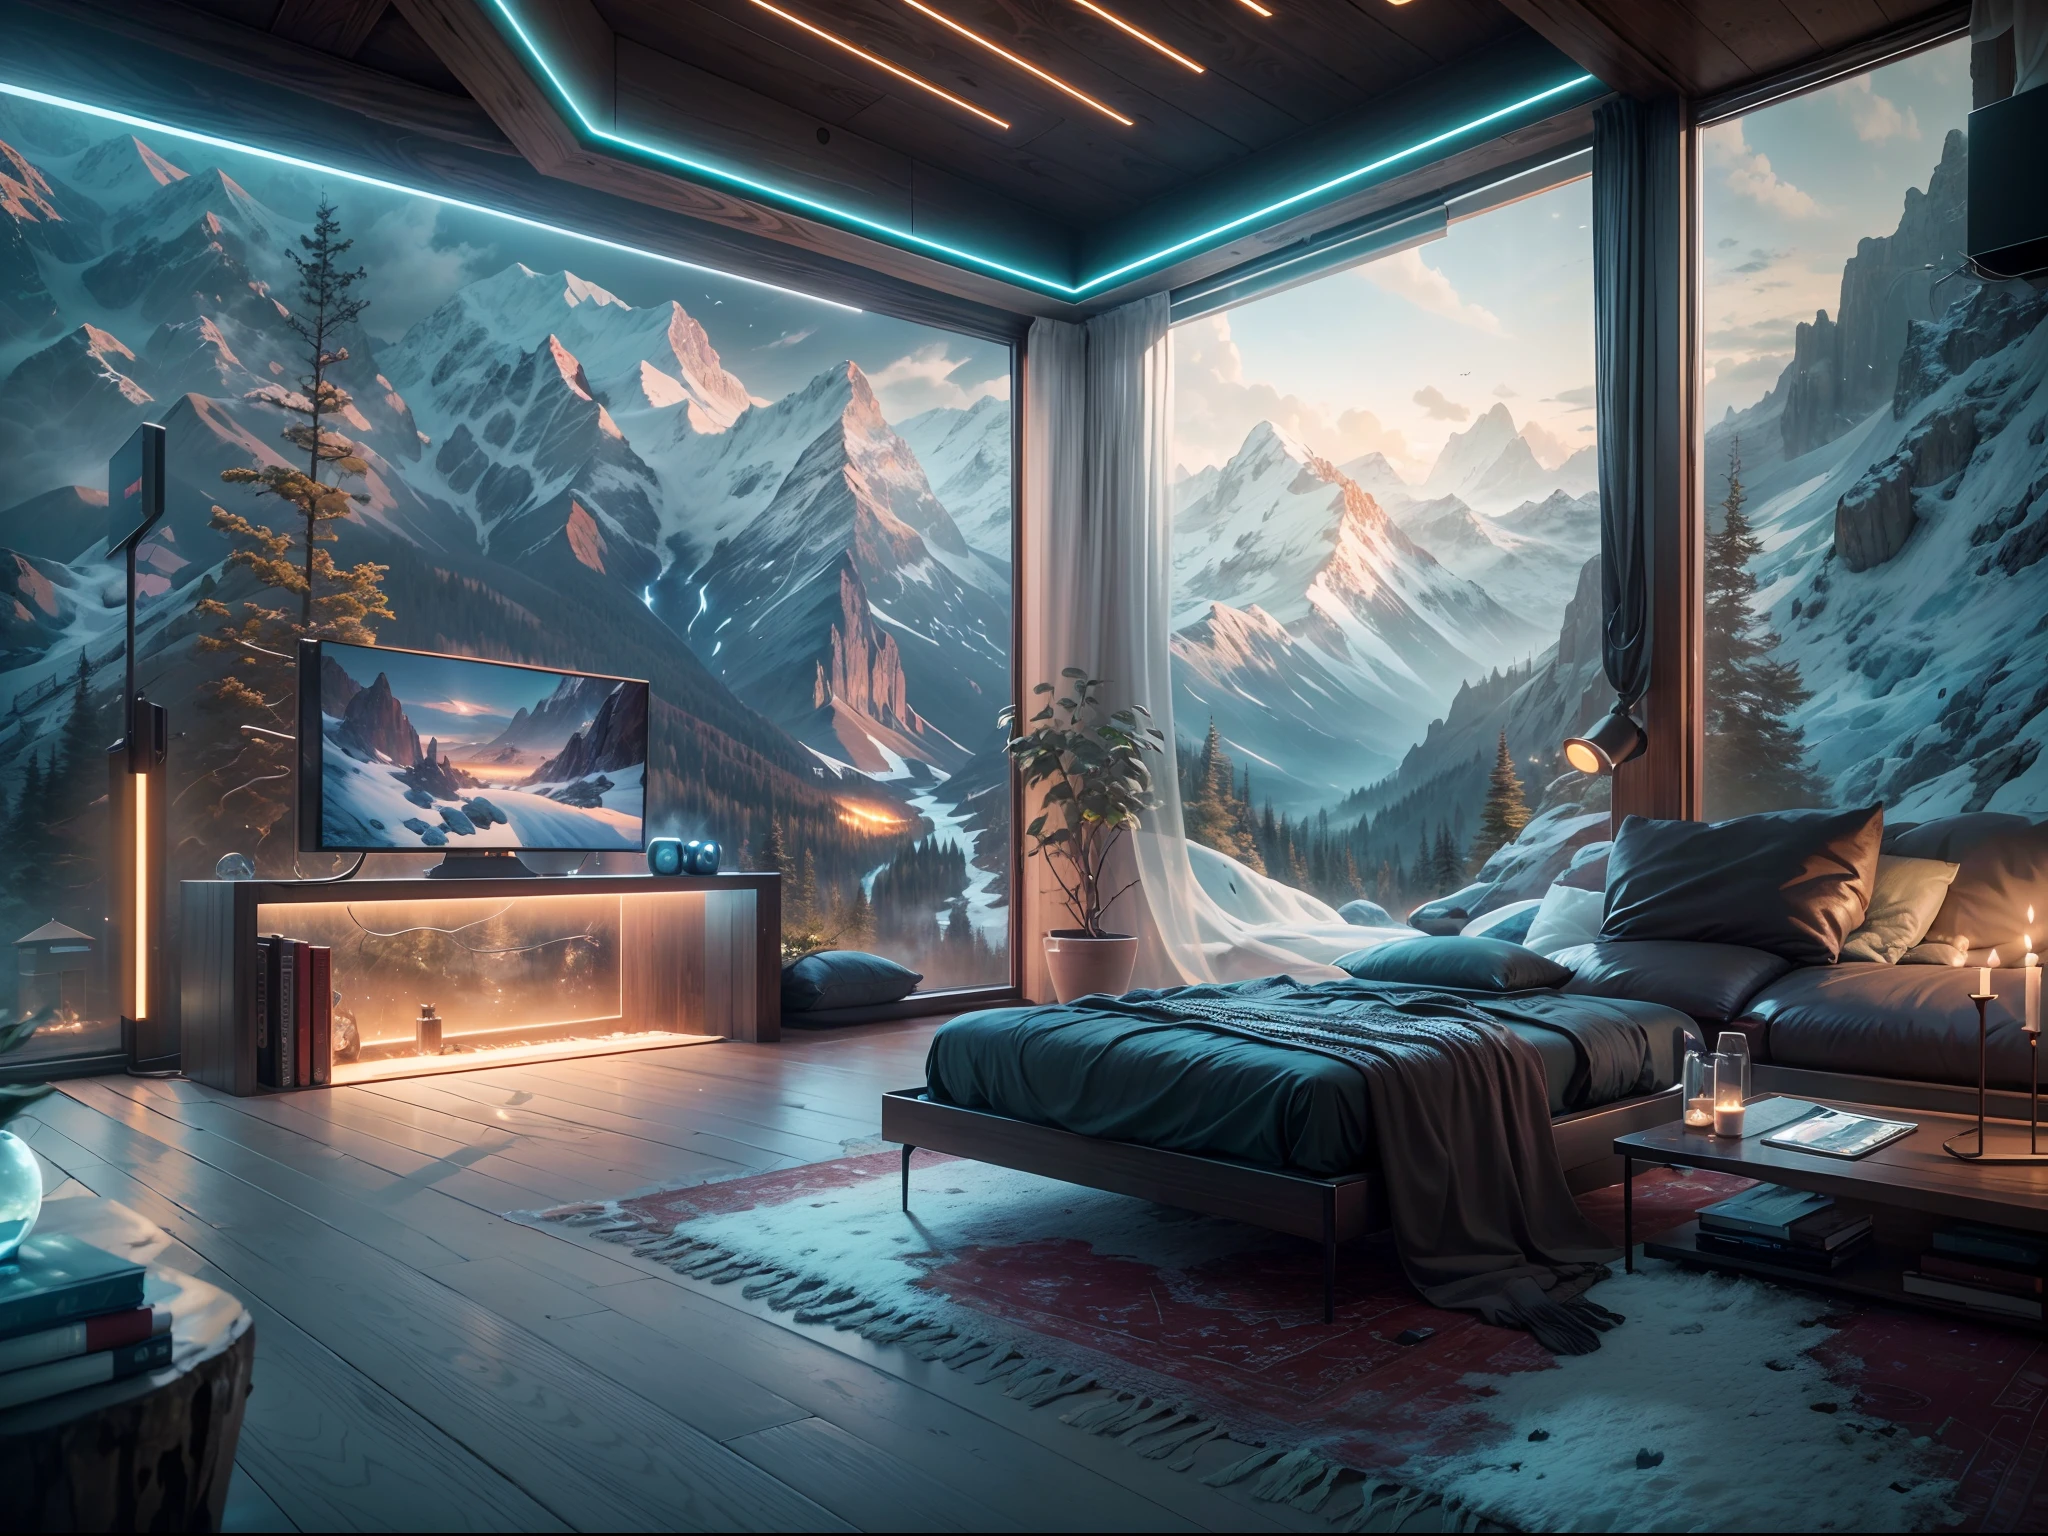 (best quality,4k,8k,highres,masterpiece:1.2),ultra-detailed,(realistic,photorealistic,photo-realistic:1.37),futuristic cyberpunk cabin,mountain view,modern,futuristic technology cabin,metallic finish,sleek design,high-tech,glowing LED lights,neon colors,advanced displays,interactive holograms,holographic projections,aesthetic architecture,panoramic windows,expansive view,spacious interior,floor-to-ceiling glass walls,transparent floors,stunning landscape,pristine nature,unspoiled wilderness,adventurous atmosphere,snow-covered peaks,majestic mountain range,endless skies,otherworldly feel,sci-fi theme,harmonious blend,blending nature and technology,integrated into the surroundings,seamless integration,advanced energy system,sustainable,eco-friendly,clean energy use,smart automation,digital assistant,controllable by voice commands,high-speed internet connection,modern furnishings,sleek furniture,minimalist decor,high-end appliances,audio-visual entertainment system,comfortable seating,zen garden,private sanctuary,peaceful retreat,tranquil setting,escape from reality,mindful relaxation,enjoyment of natural beauty,magical moments,incredible experience.